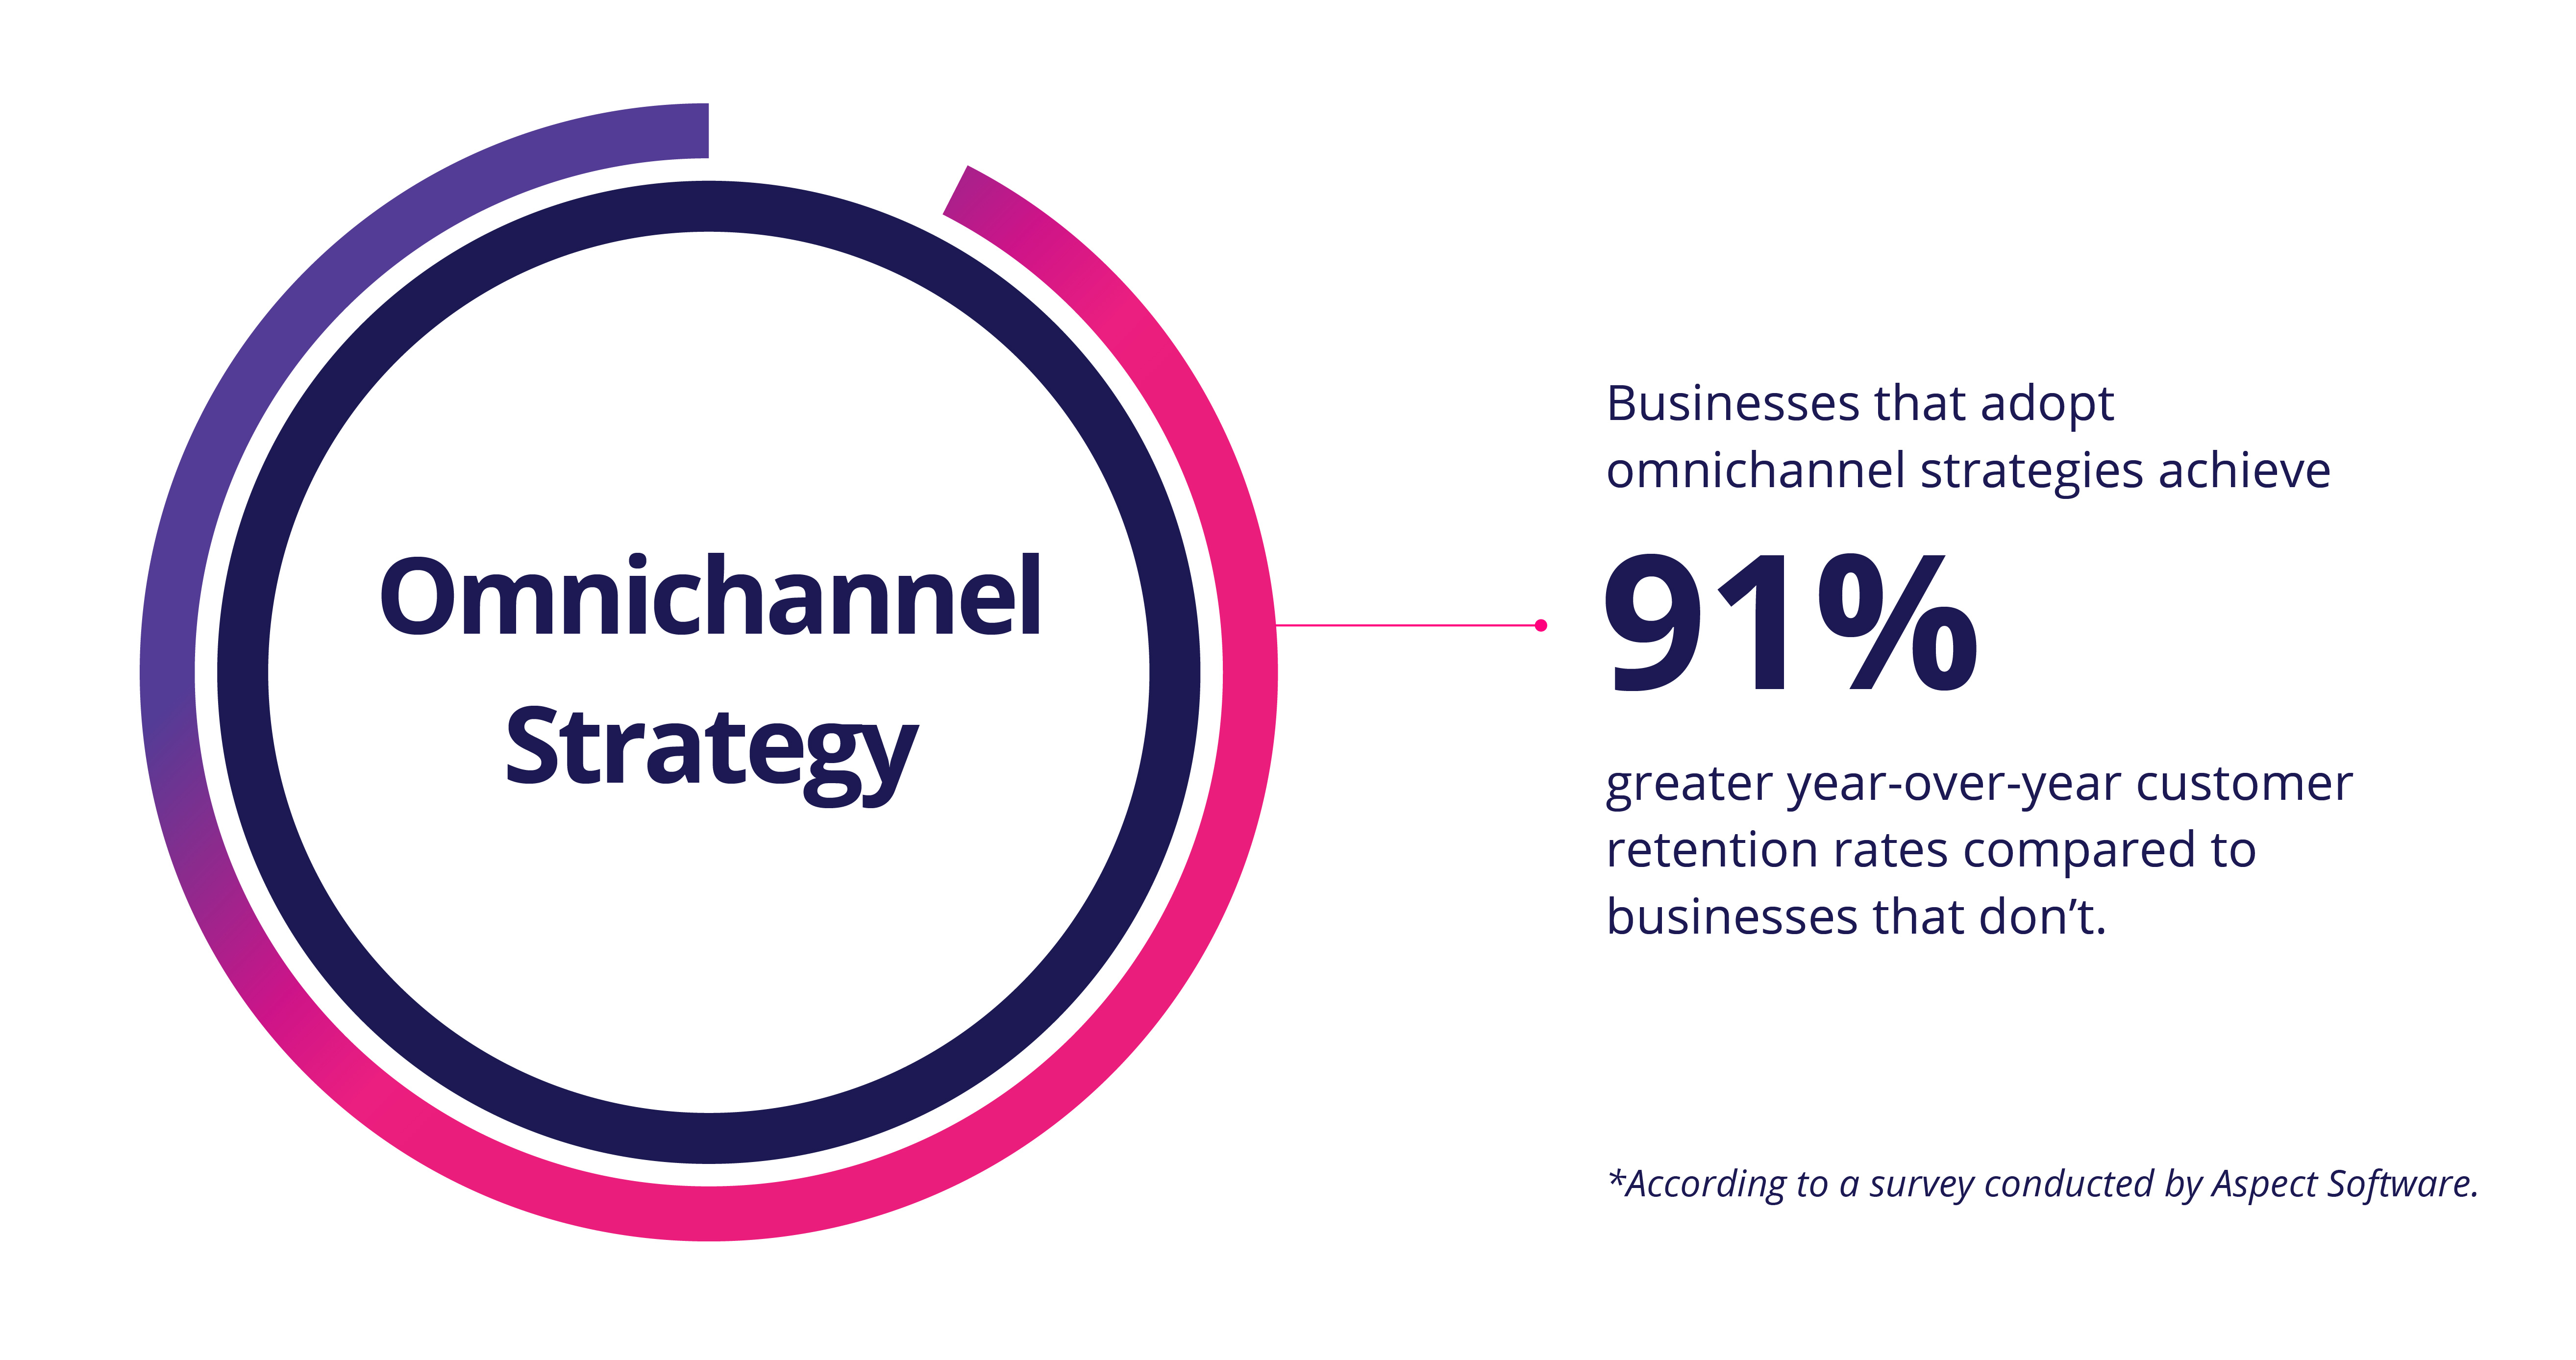 Omnichannel Strategy to Increase Inventory Turnover 